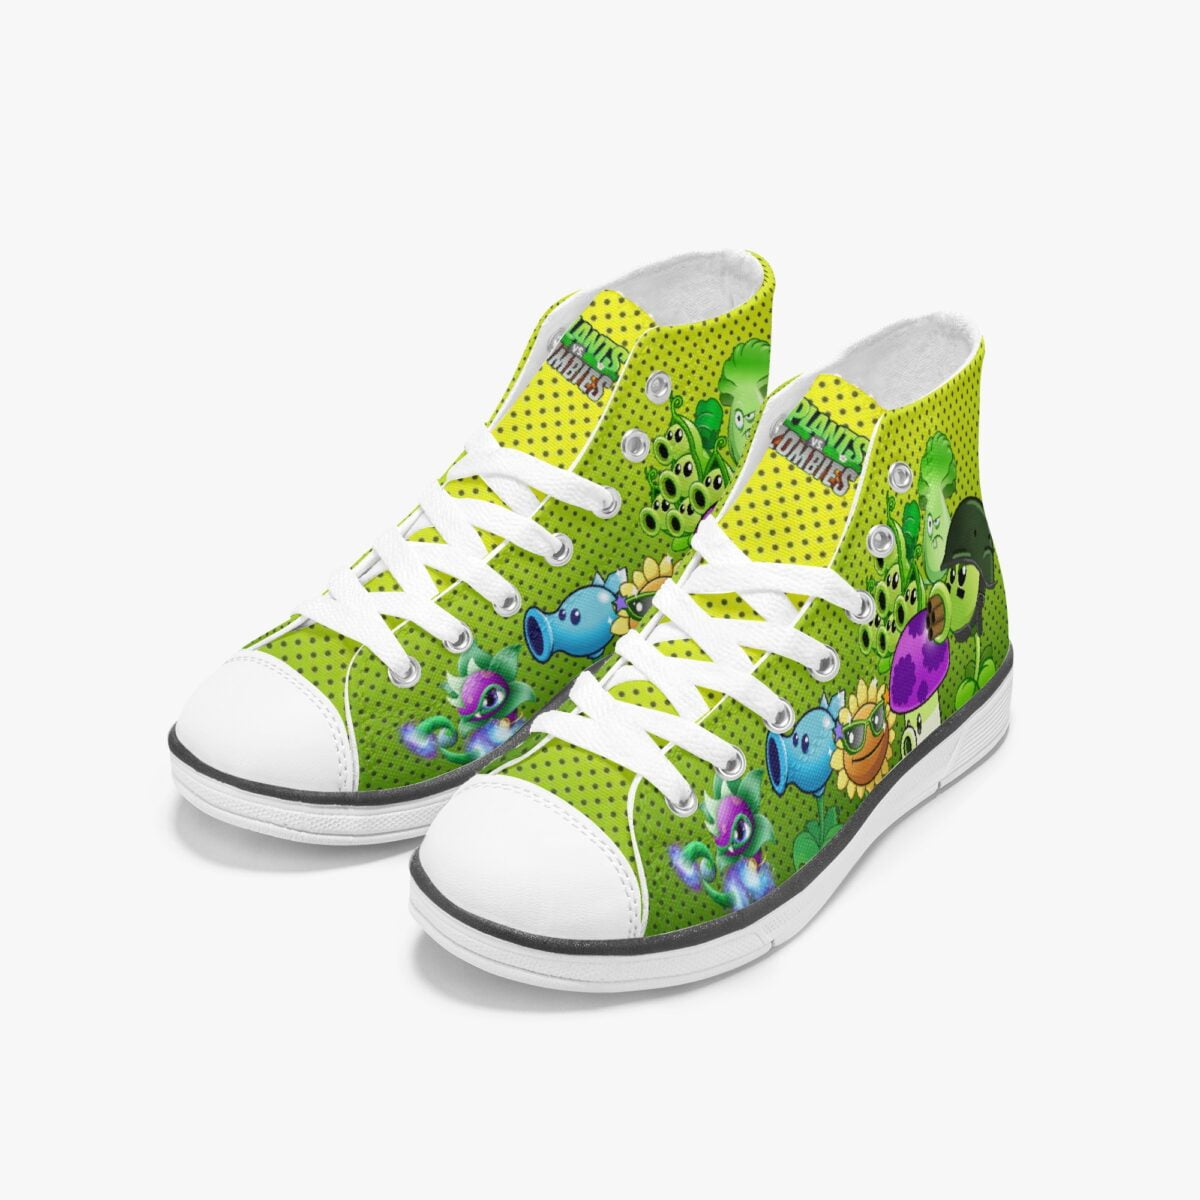 Plants vs Zombies Personalized High-Top Sneakers for Children Cool Kiddo 12